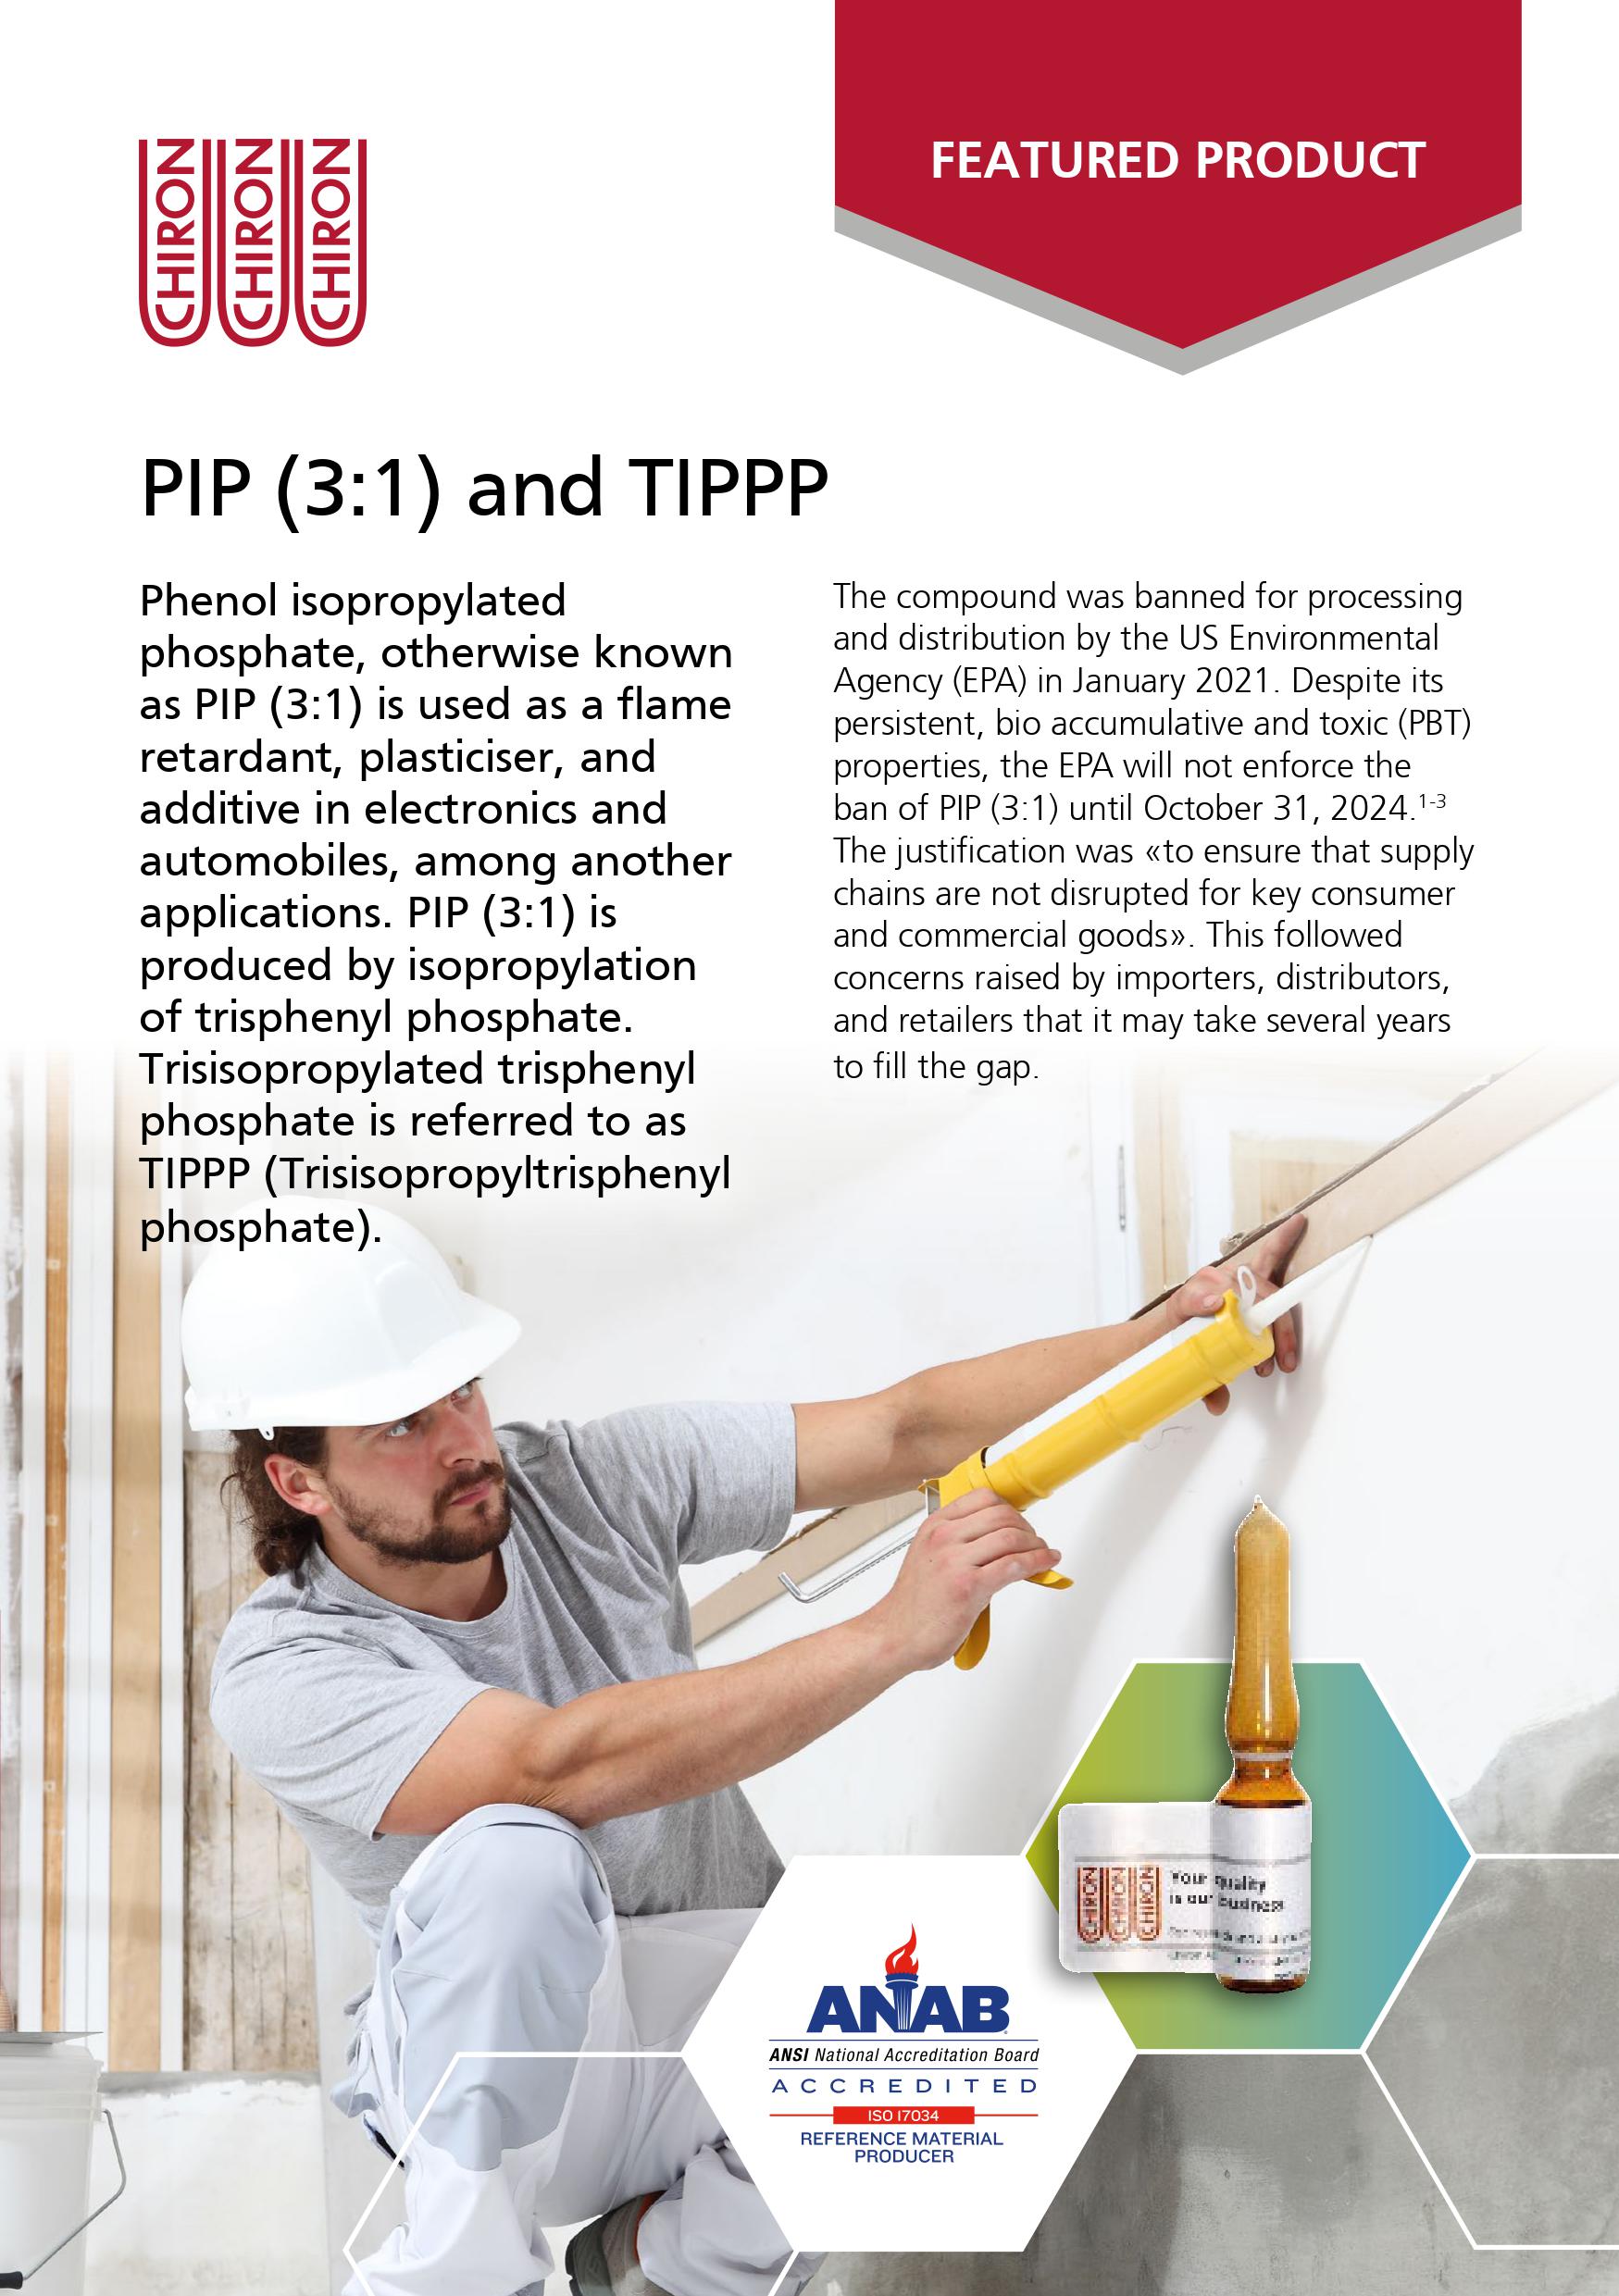 Featured product: PIP (3:1) and TIPPP